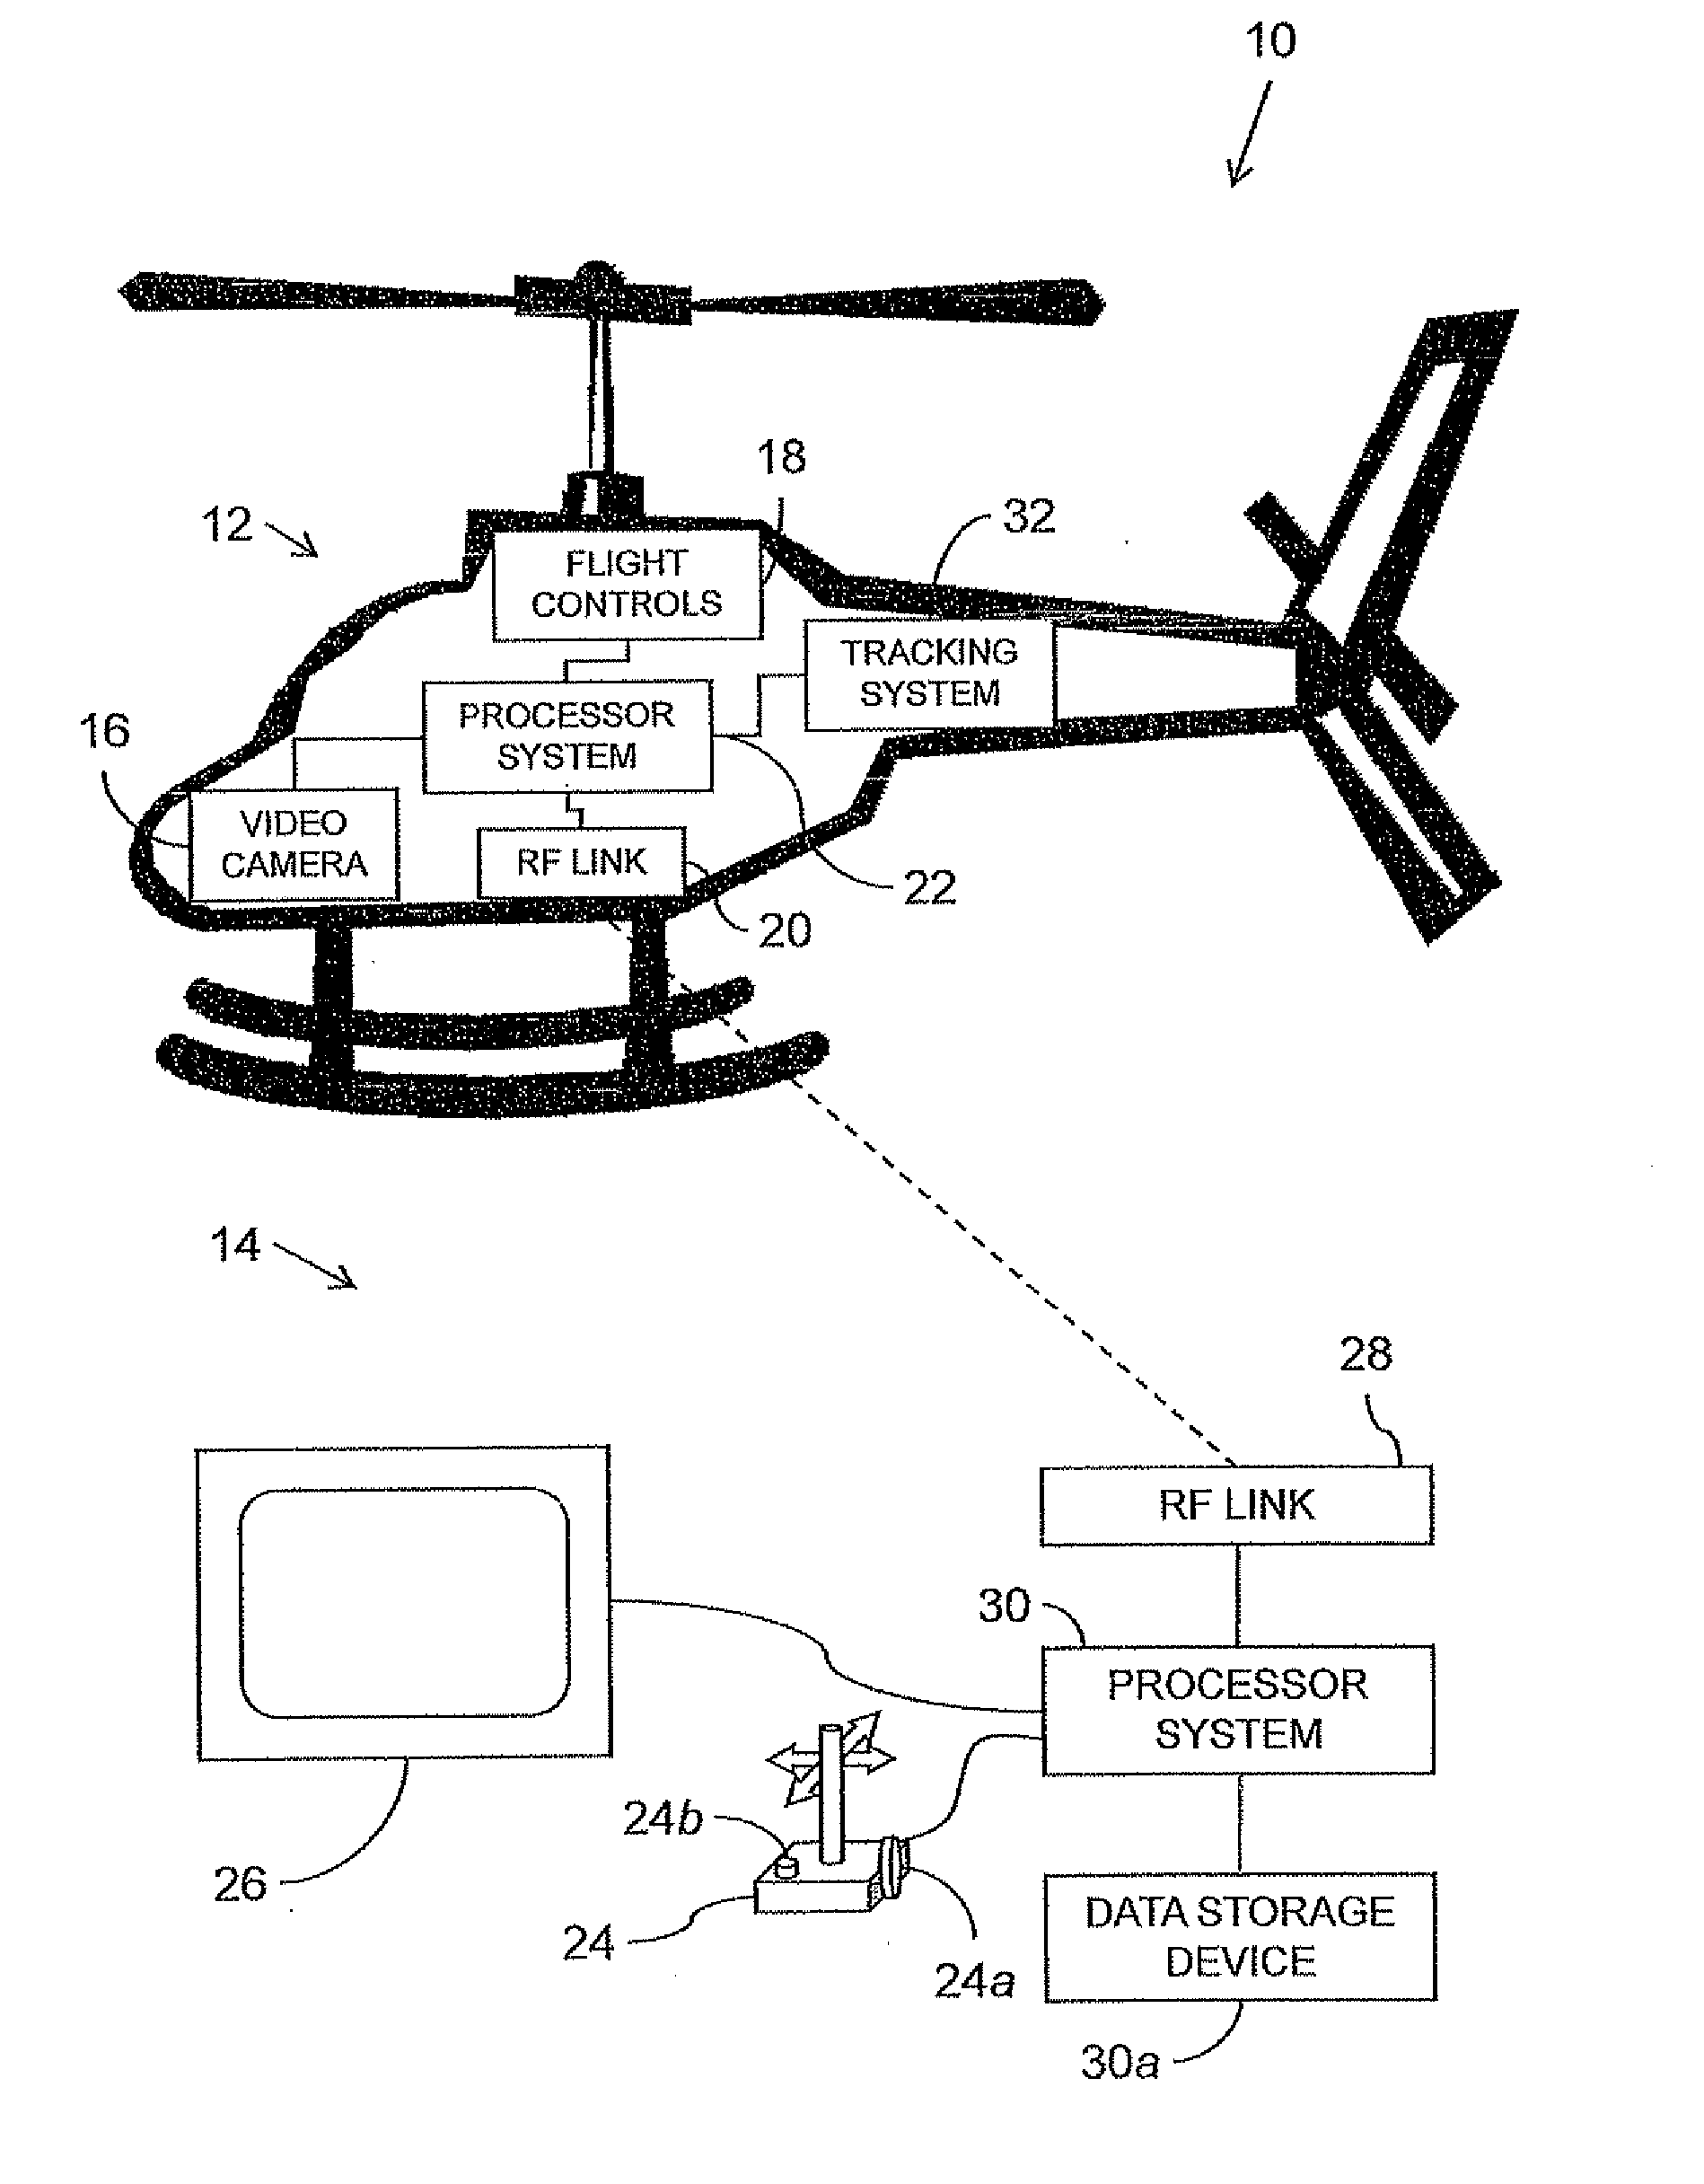 System and method for navigating a remote control vehicle past obstacles